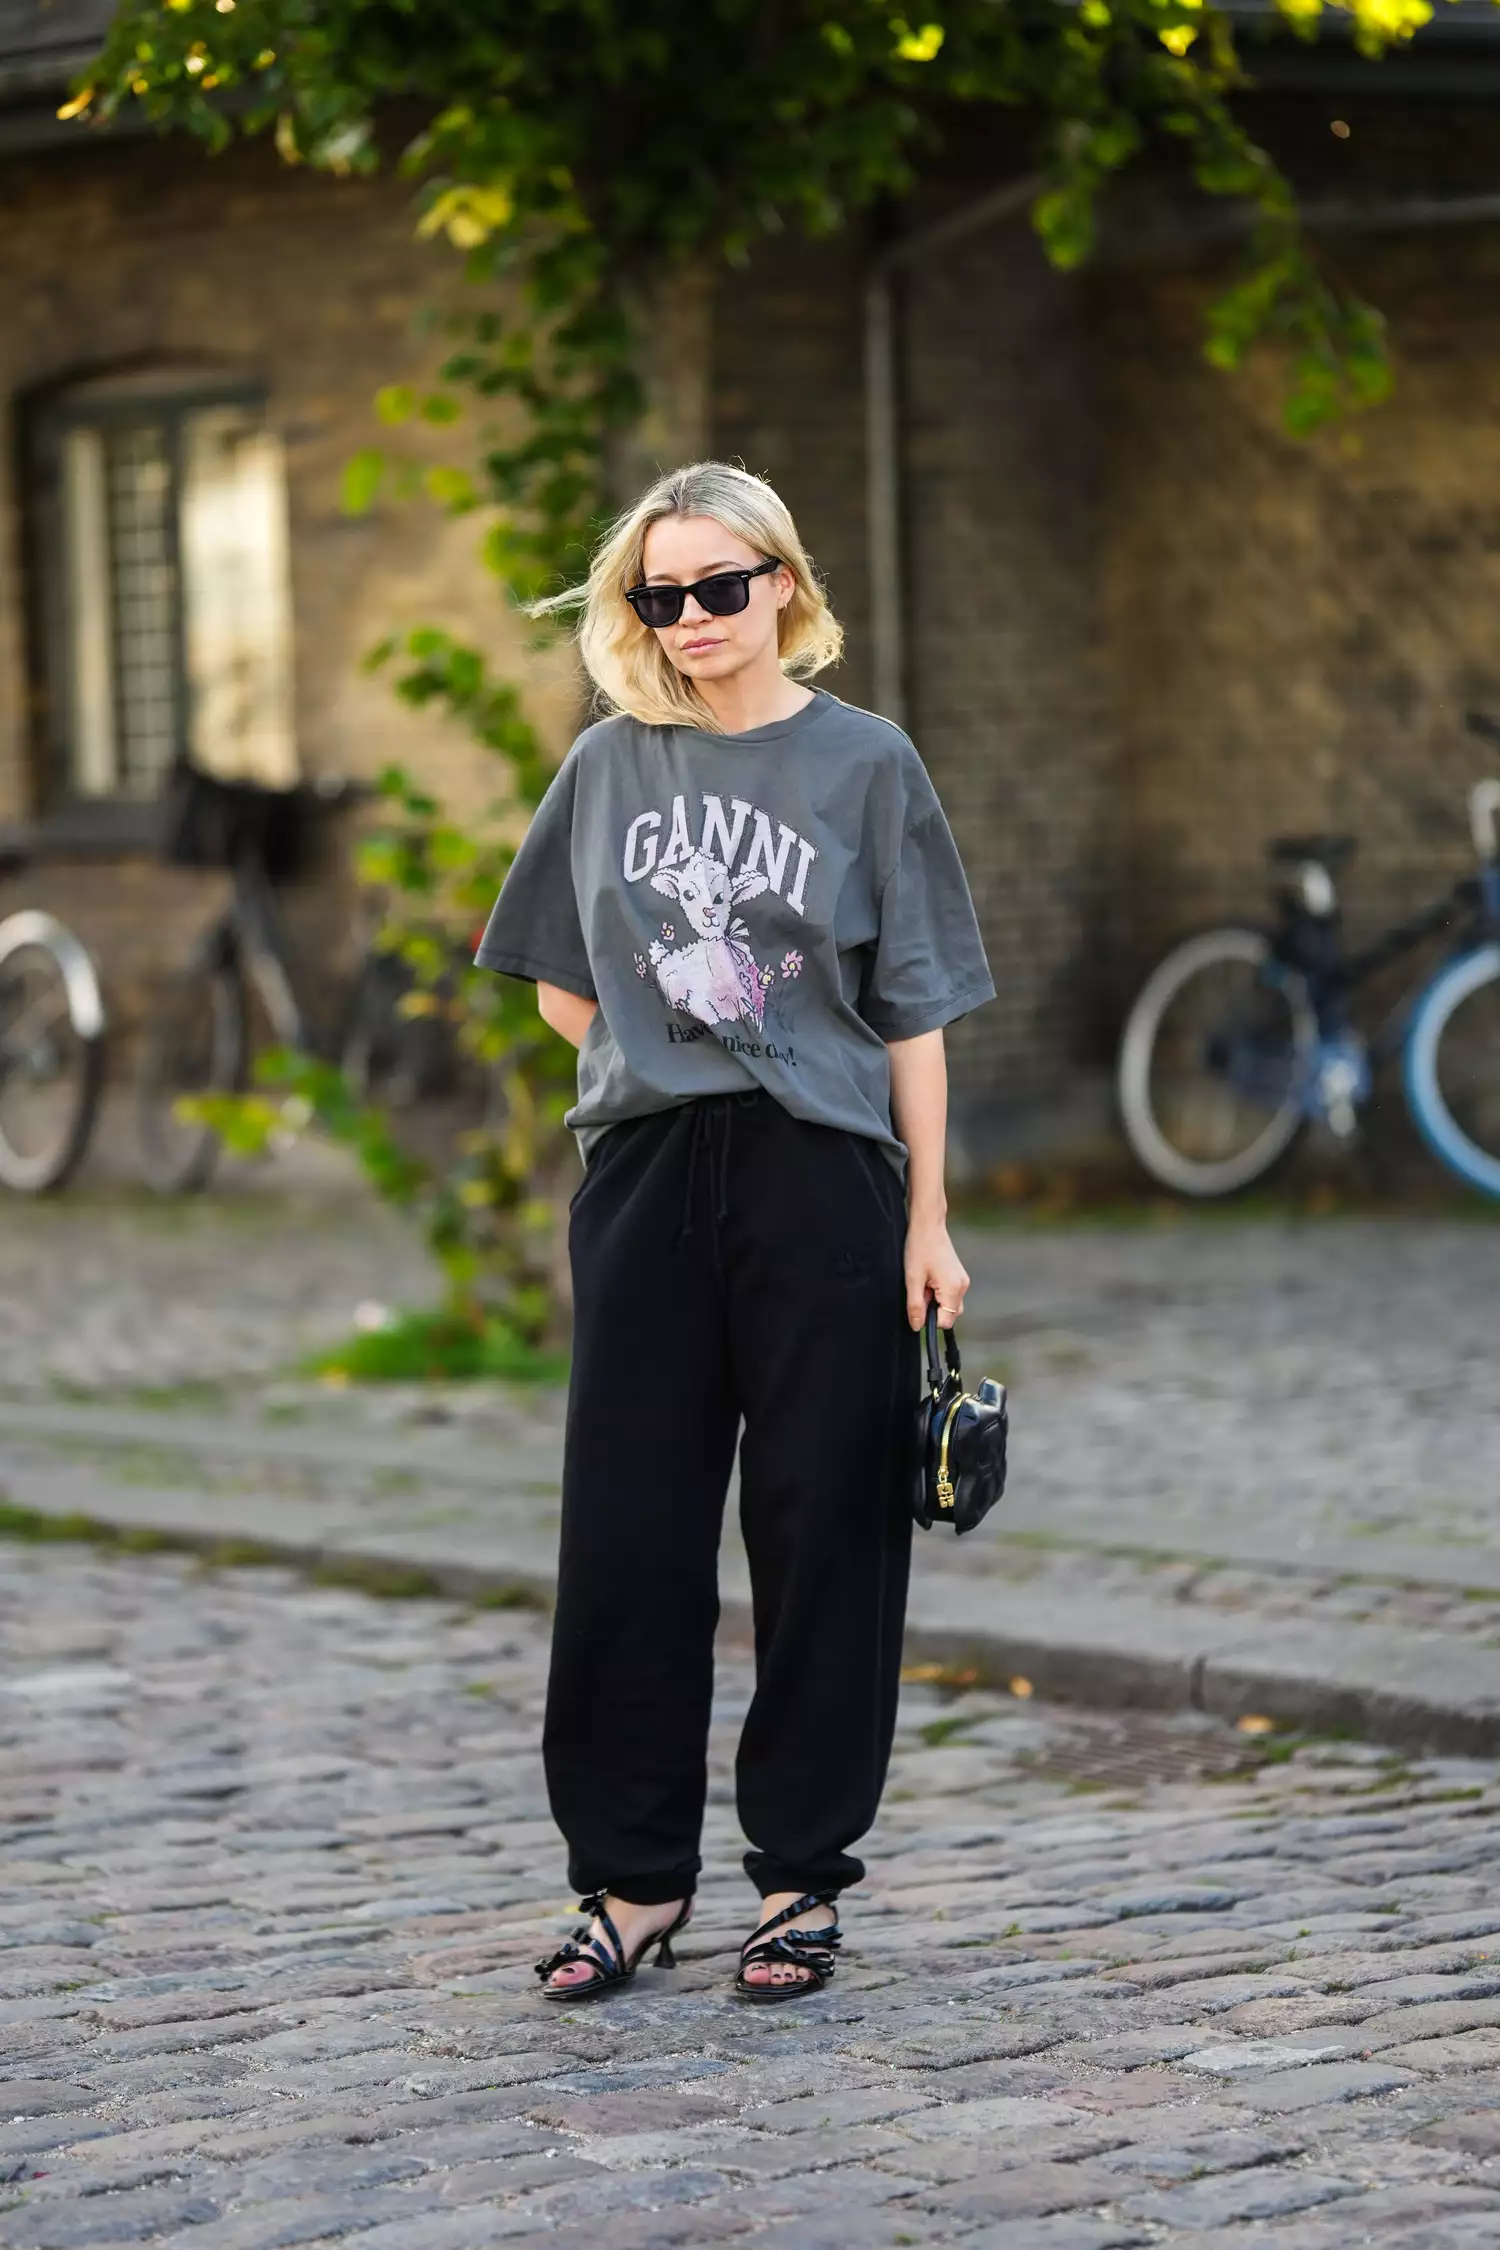 model wears black sunglasses, gold micro earrings, a pale gray with embroidered white and pale pink pattern t-shirt from Ganni, black large pants, a black shiny leather zipper handbag, black shiny leather asymmetric heels shoes